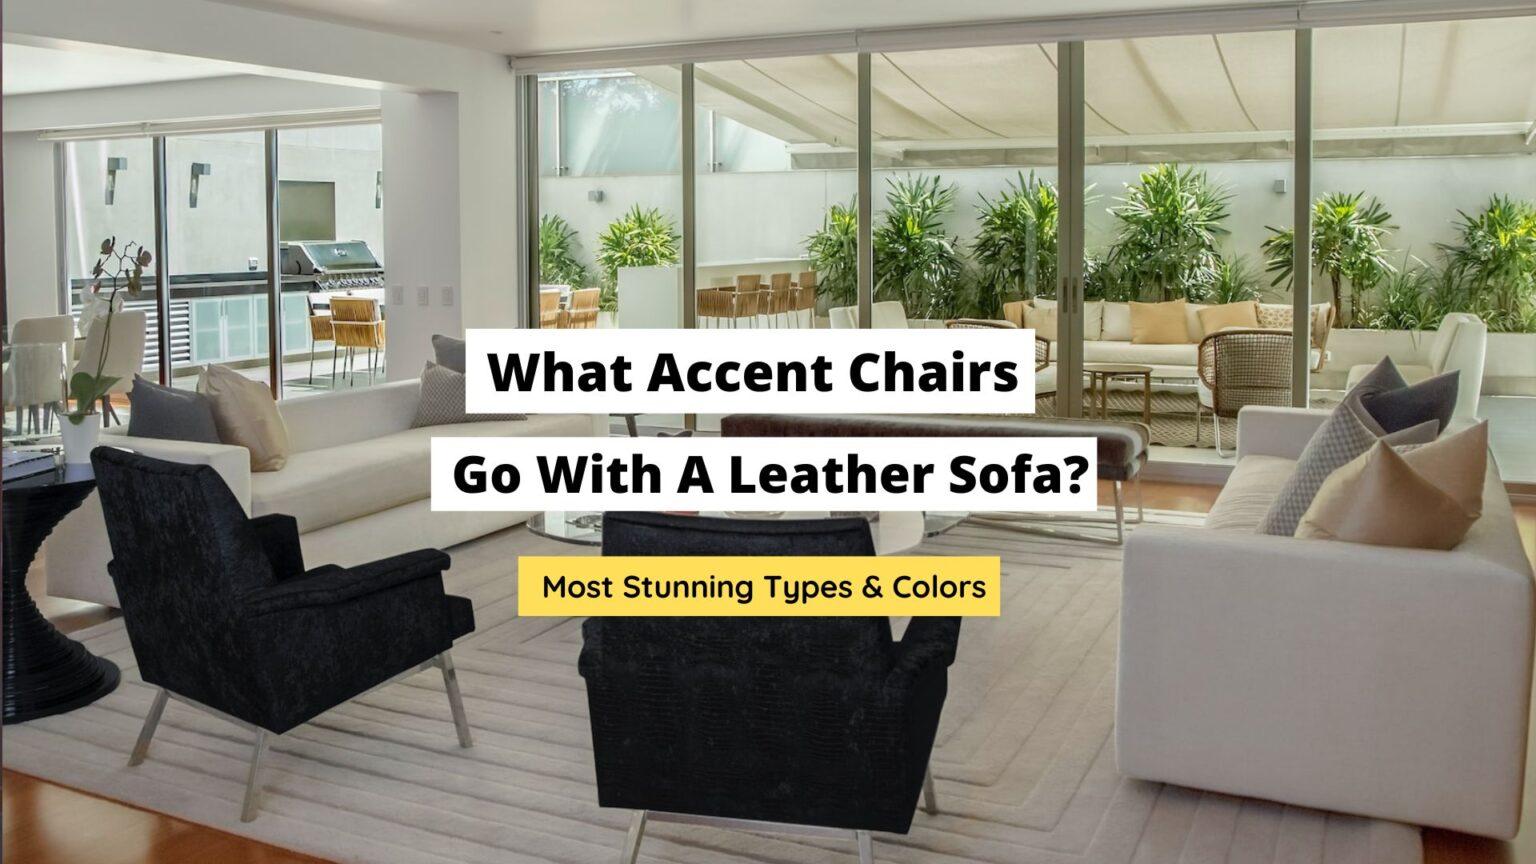 What Accent Chairs Go With A Leather Sofa? - Craftsonfire